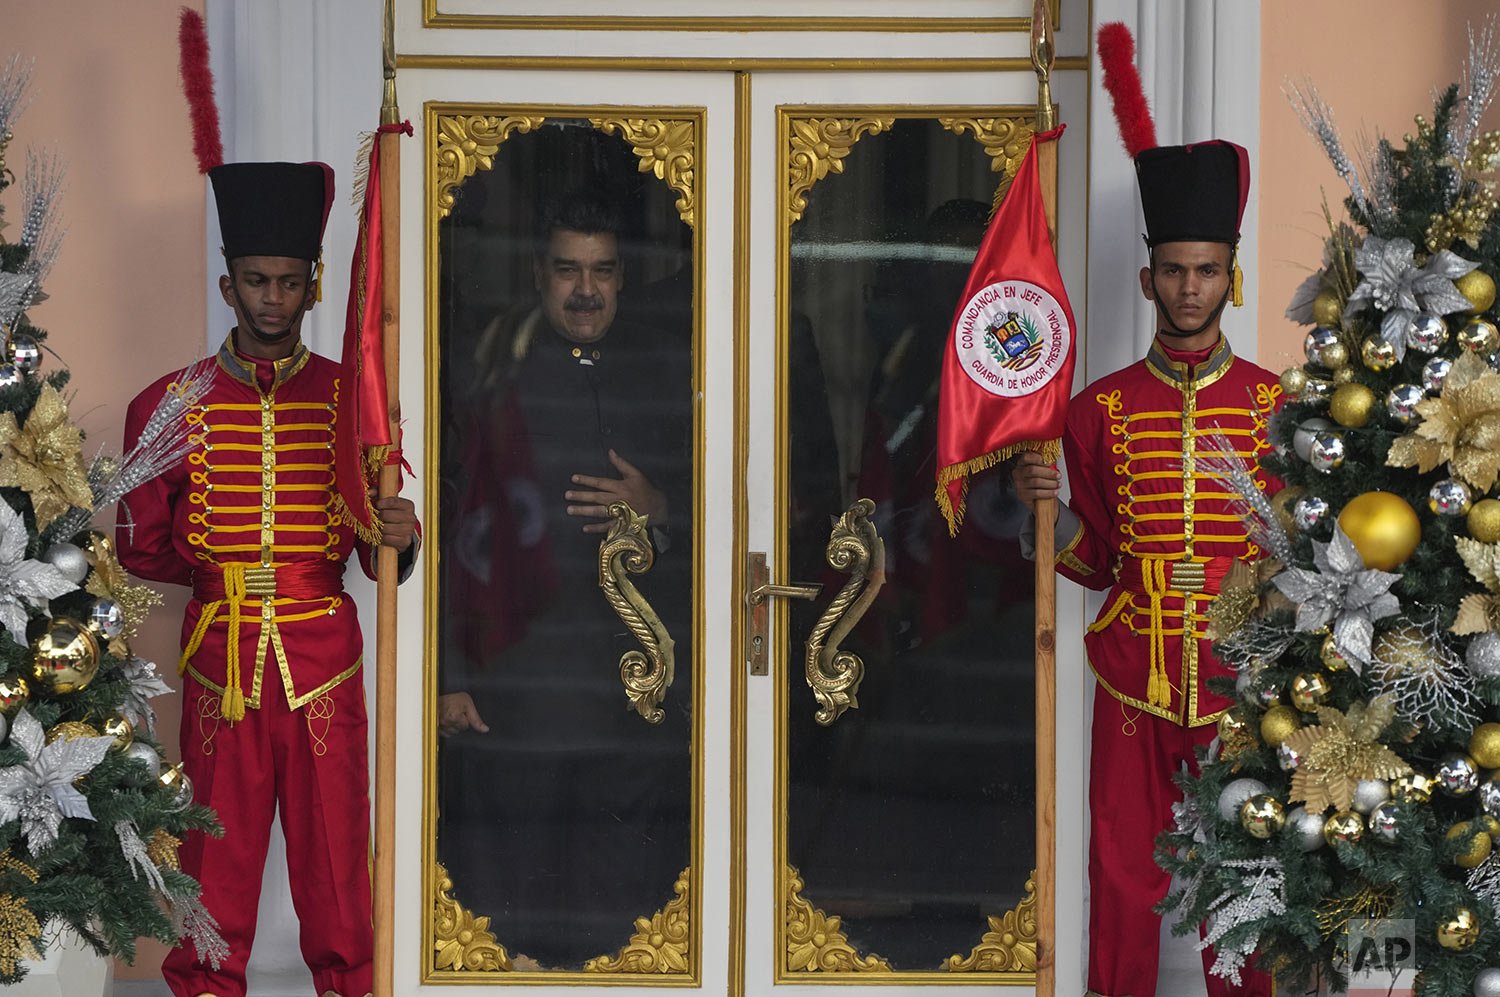  Venezuelan President Nicolas Maduro looks out a window as he waits for the arrival of Guinea-Bissau President Umaro Sissoco Embalo, at the Miraflores Presidential Palace, in Caracas, Venezuela, Wednesday, Nov. 2, 2022. (AP Photo/Ariana Cubillos) 